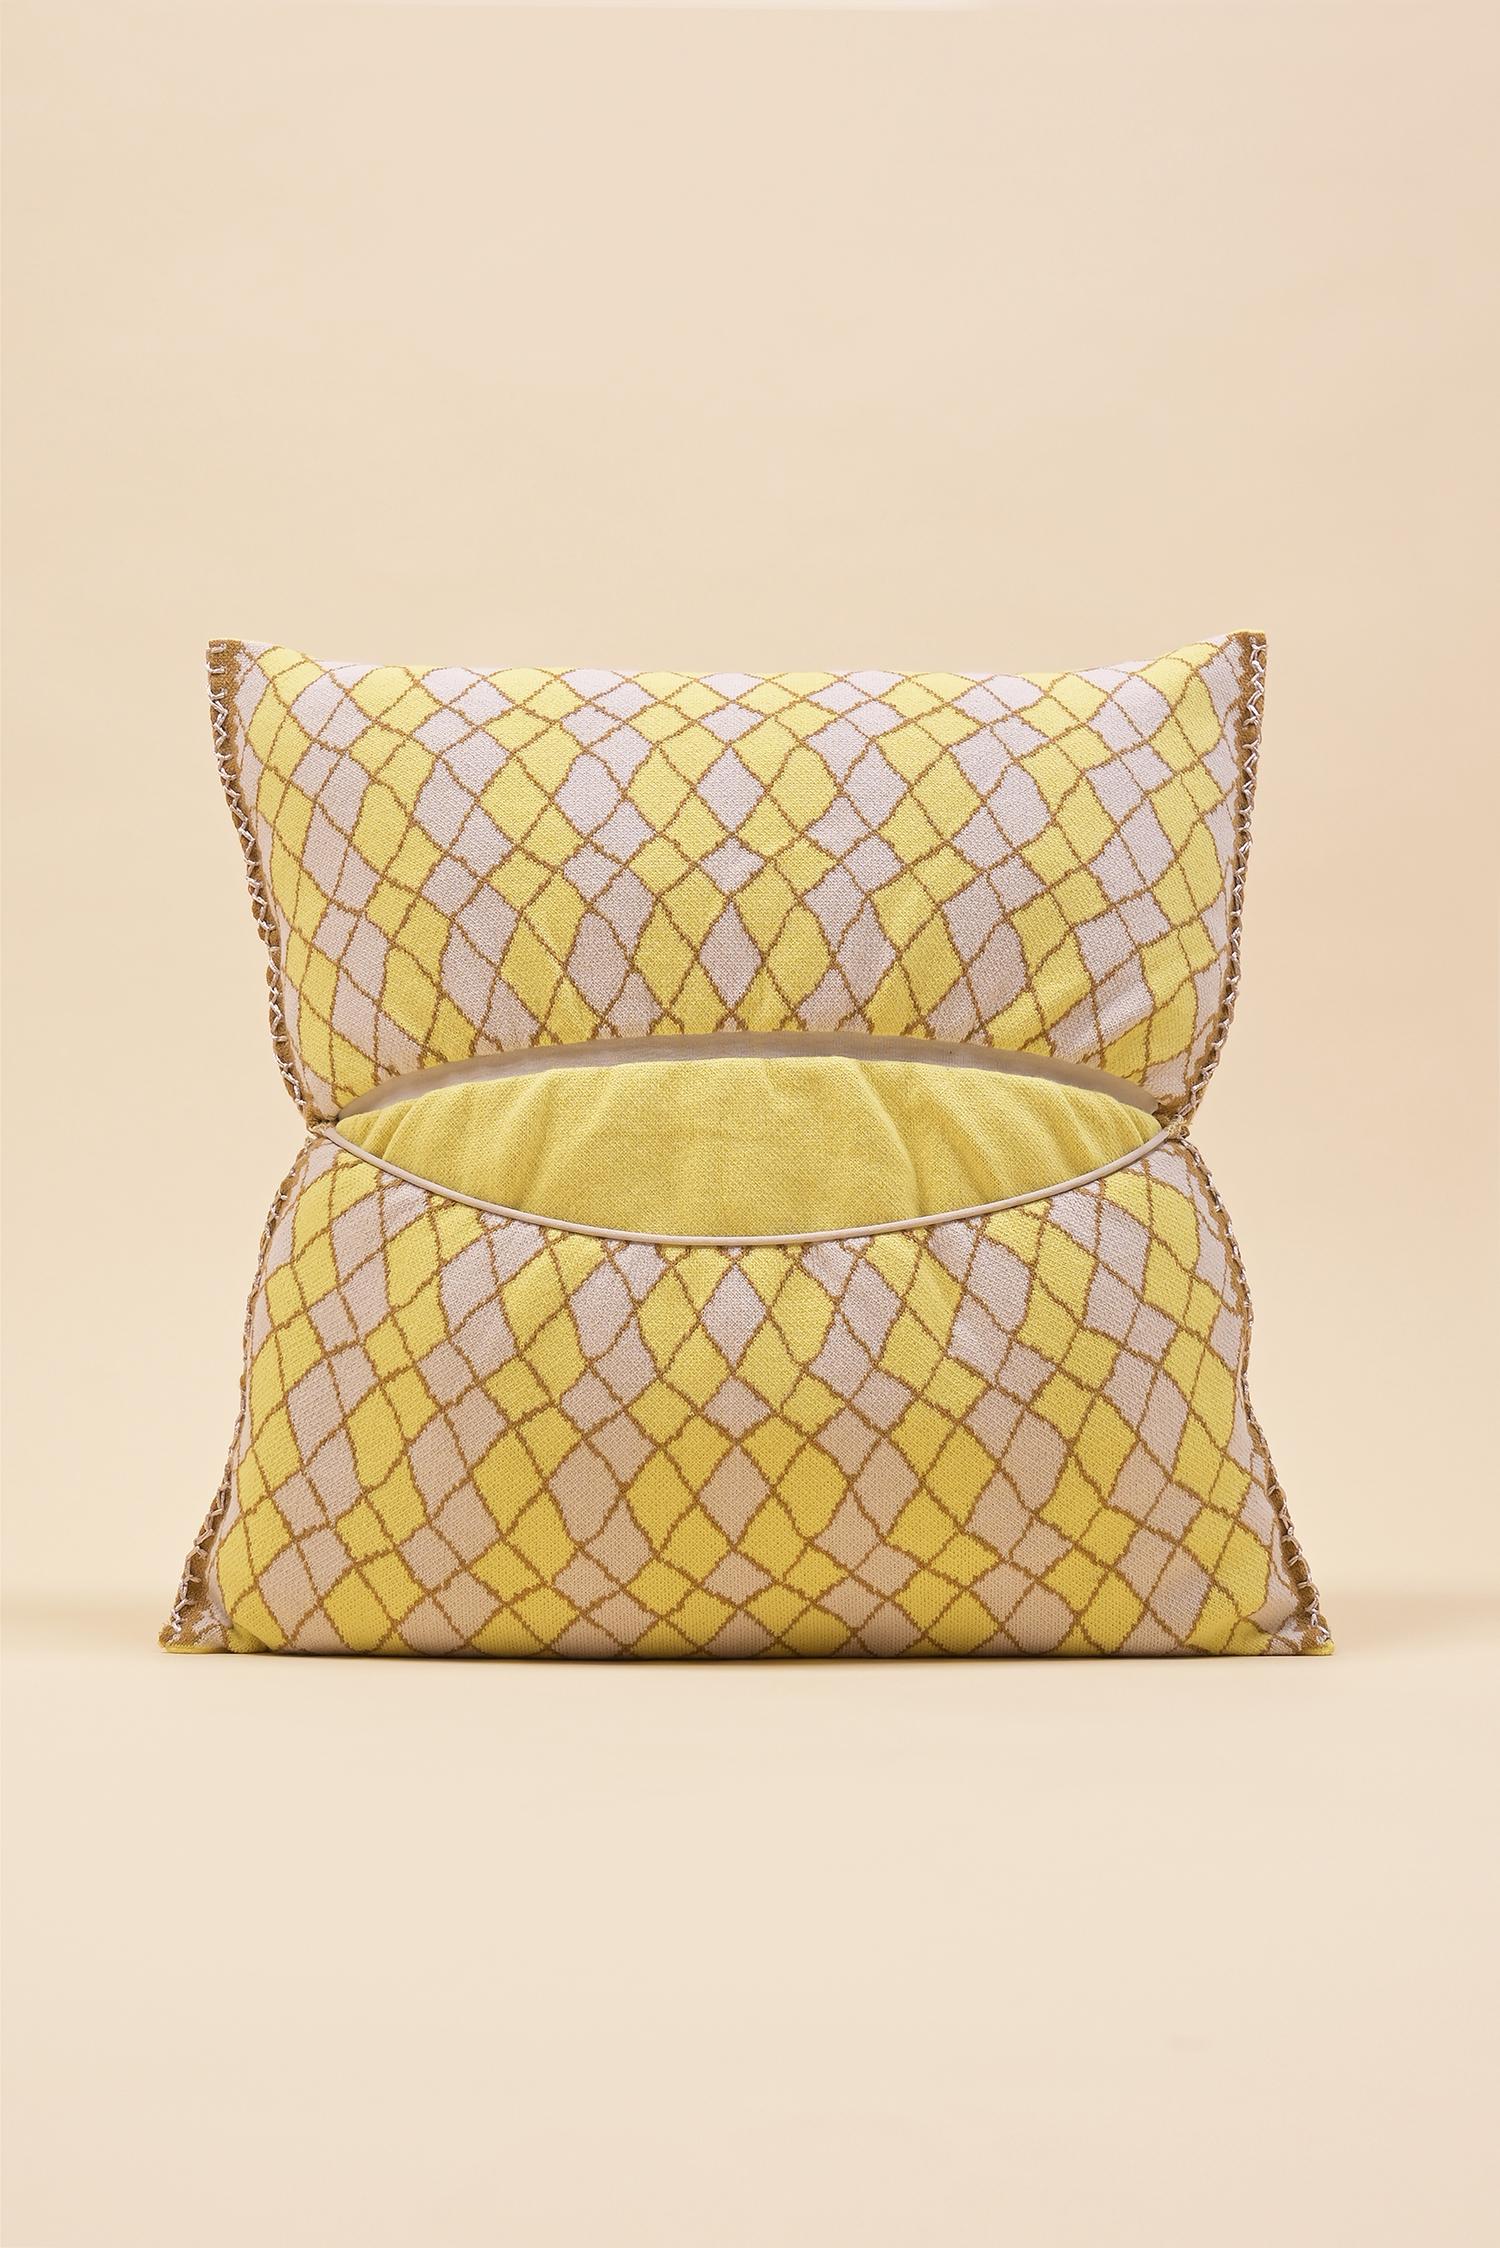 This product belongs to our Collection N°2 - a collection that explores the delicate process of blending in from a social point of view.

Soft and with a unique form - this pillowcase brings high comfort and color to your home. It is made from